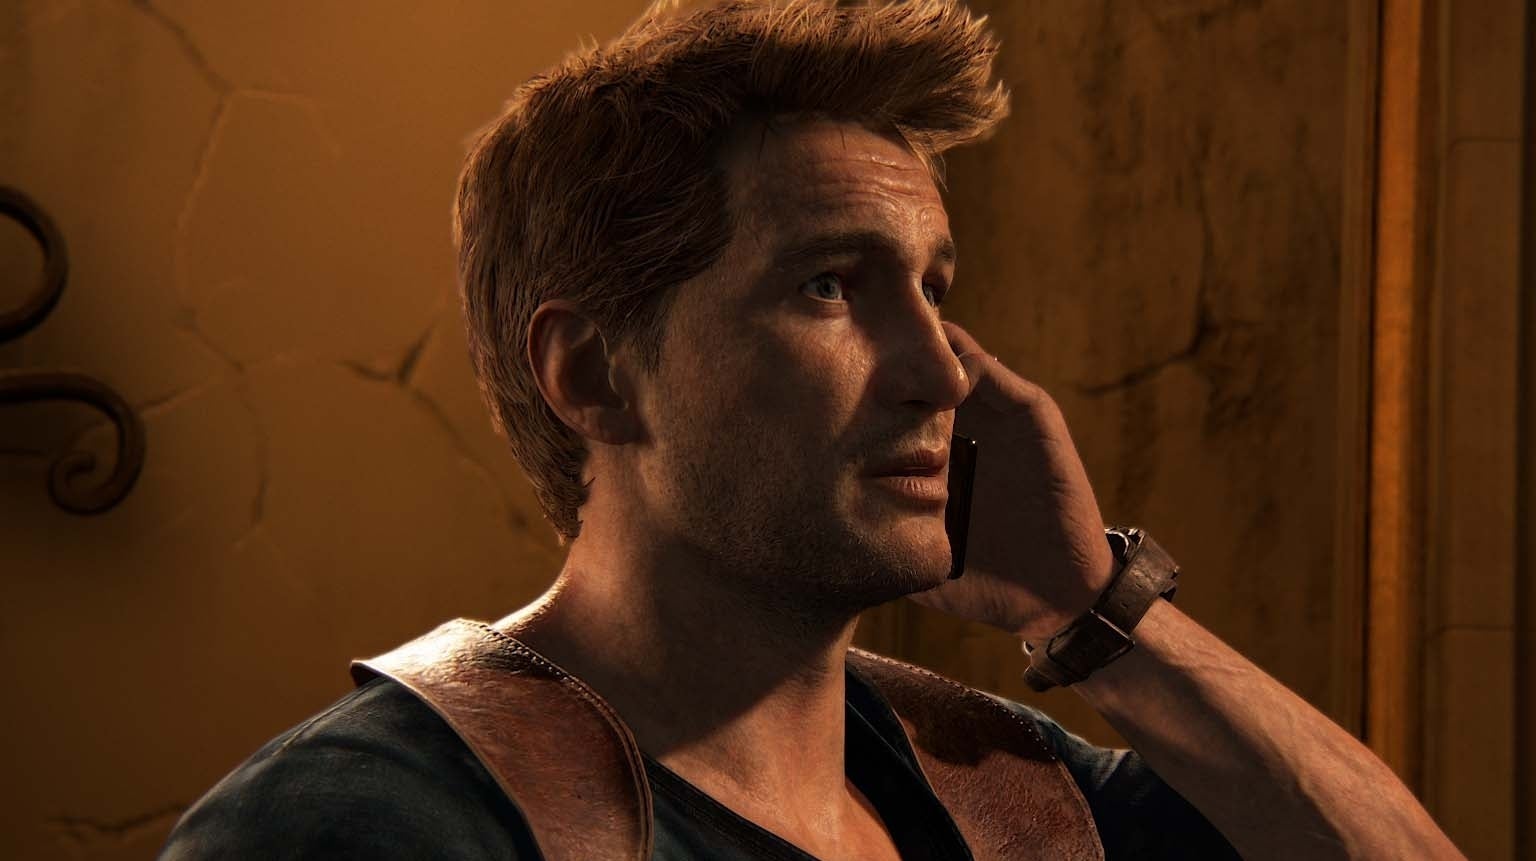 Image for Seven directors later, the Uncharted movie has finally started filming